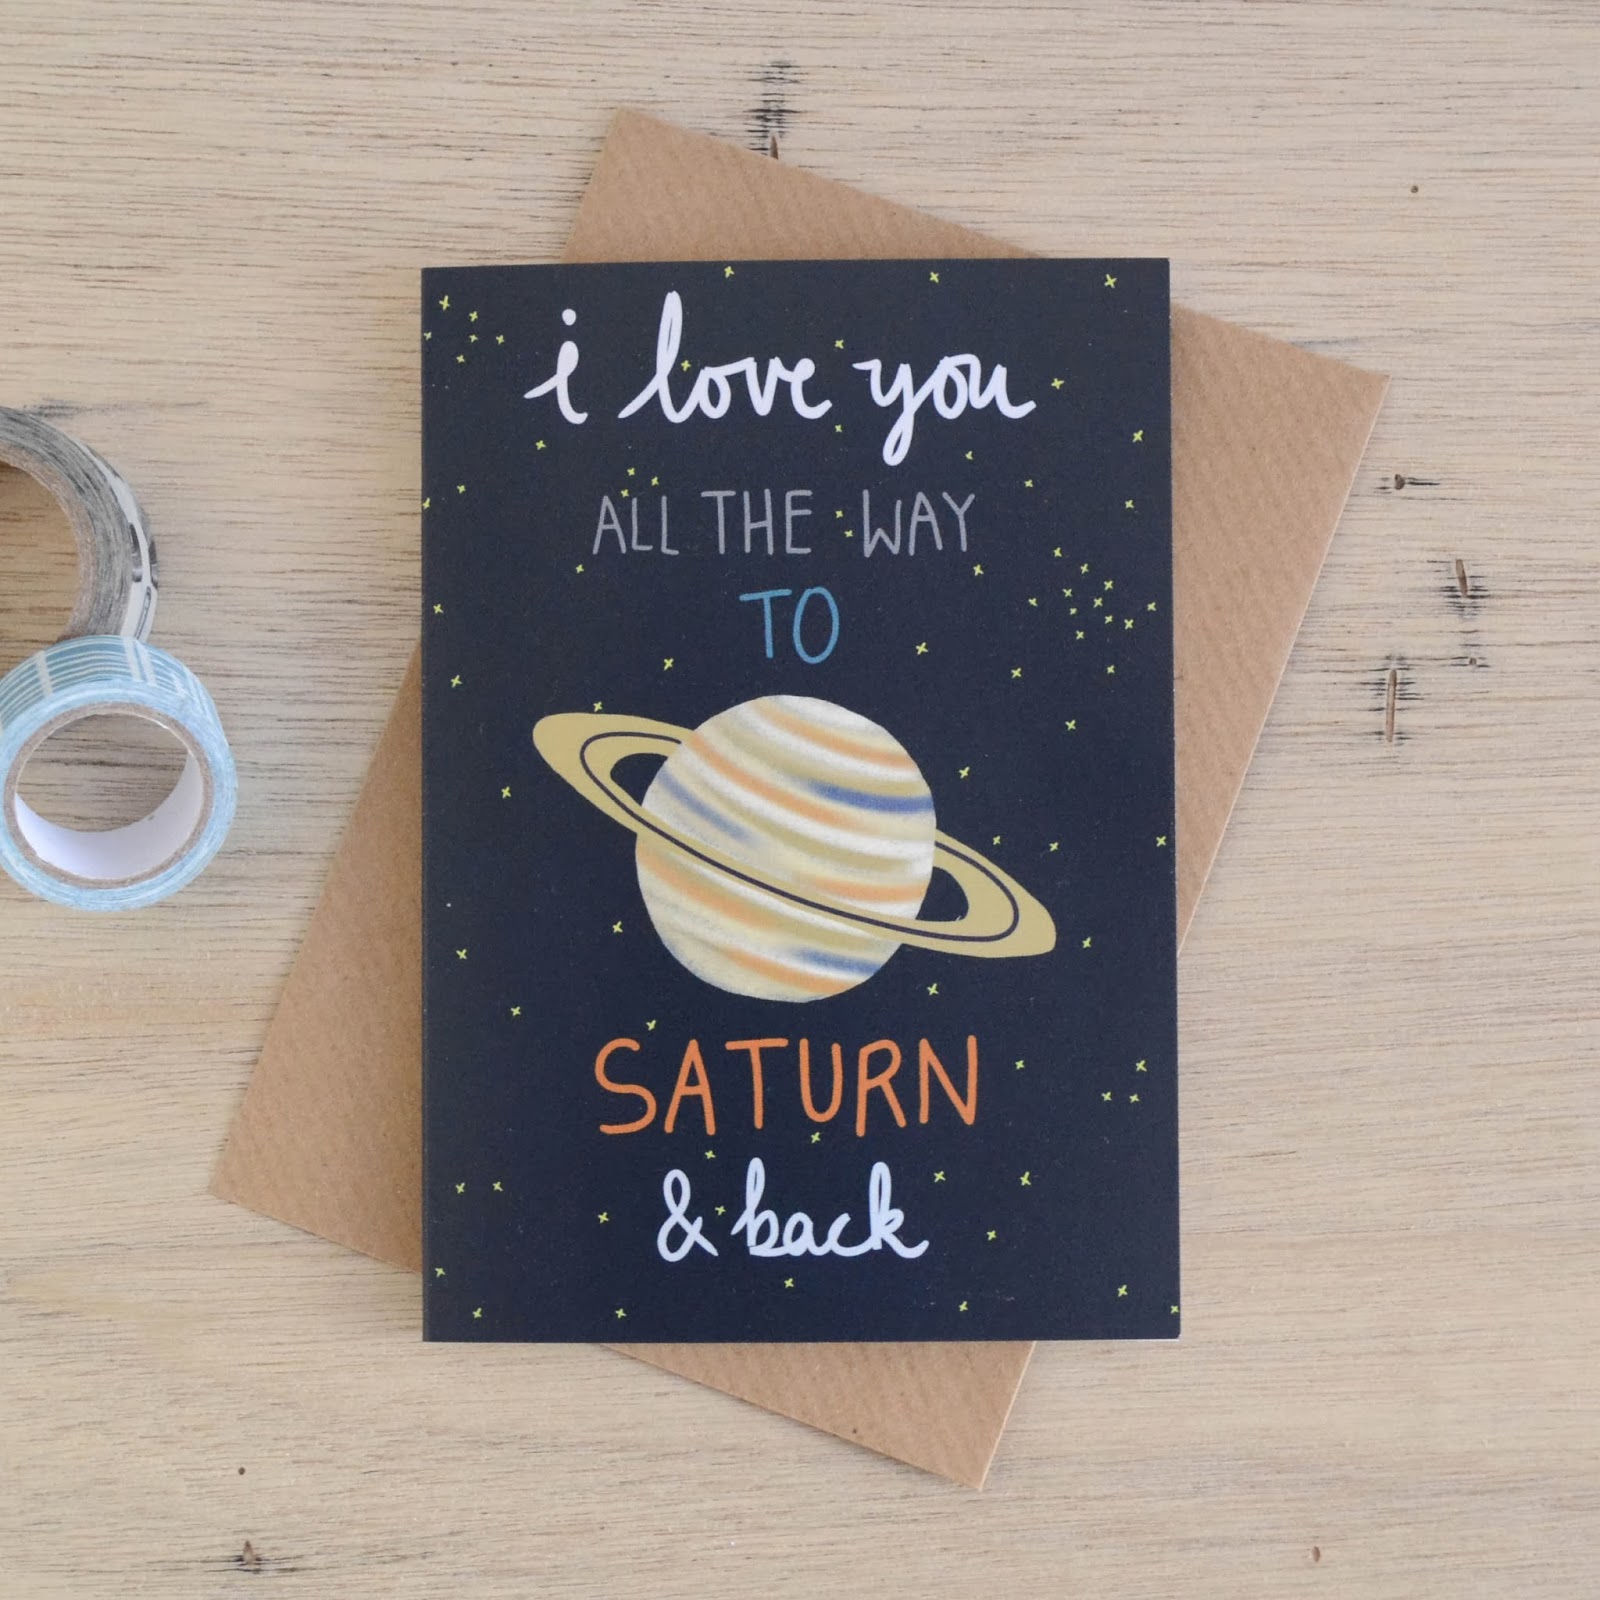 http://folksy.com/items/5725641-I-Love-You-To-Saturn-Back-Card